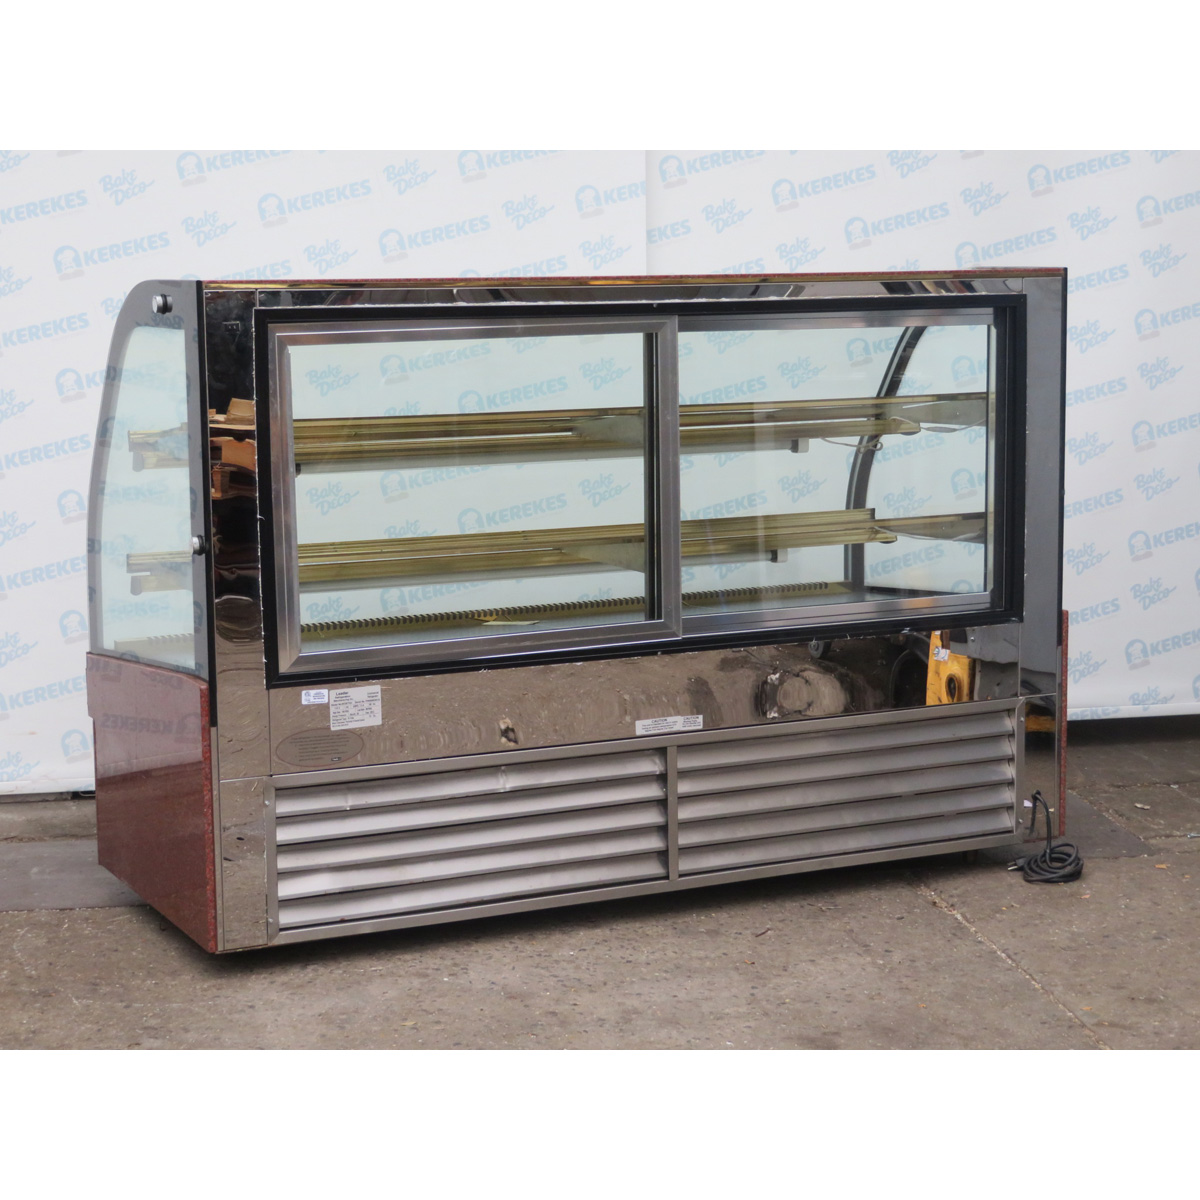 Leader MCB77SC Refrigerated Bakery Display Case, Used Excellent Condition image 2